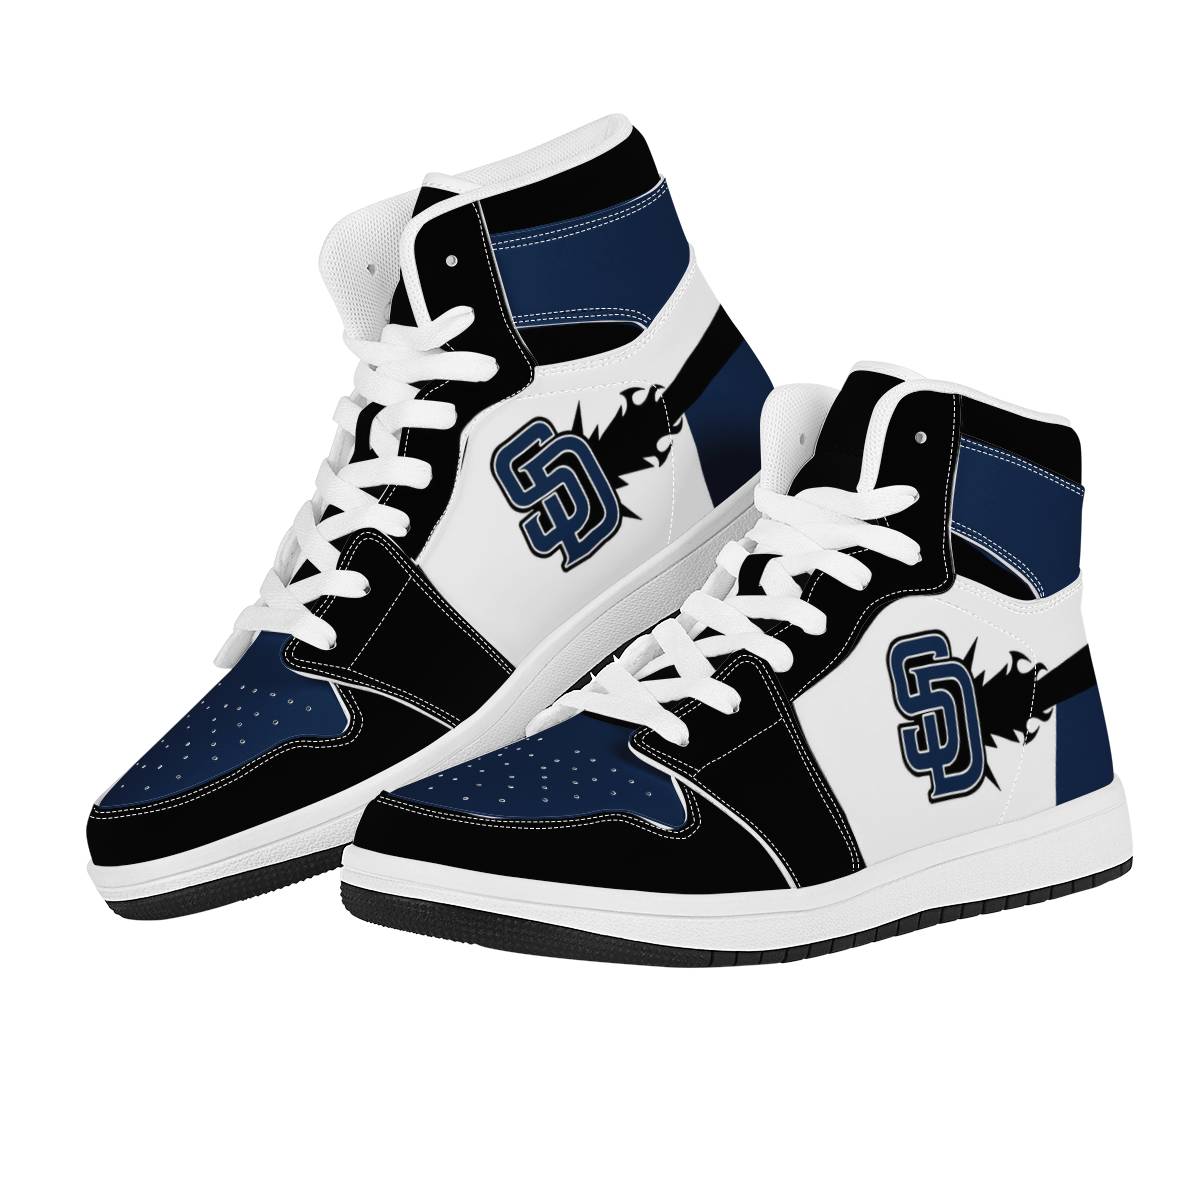 Women's San Diego Padres High Top Leather AJ1 Sneakers 001